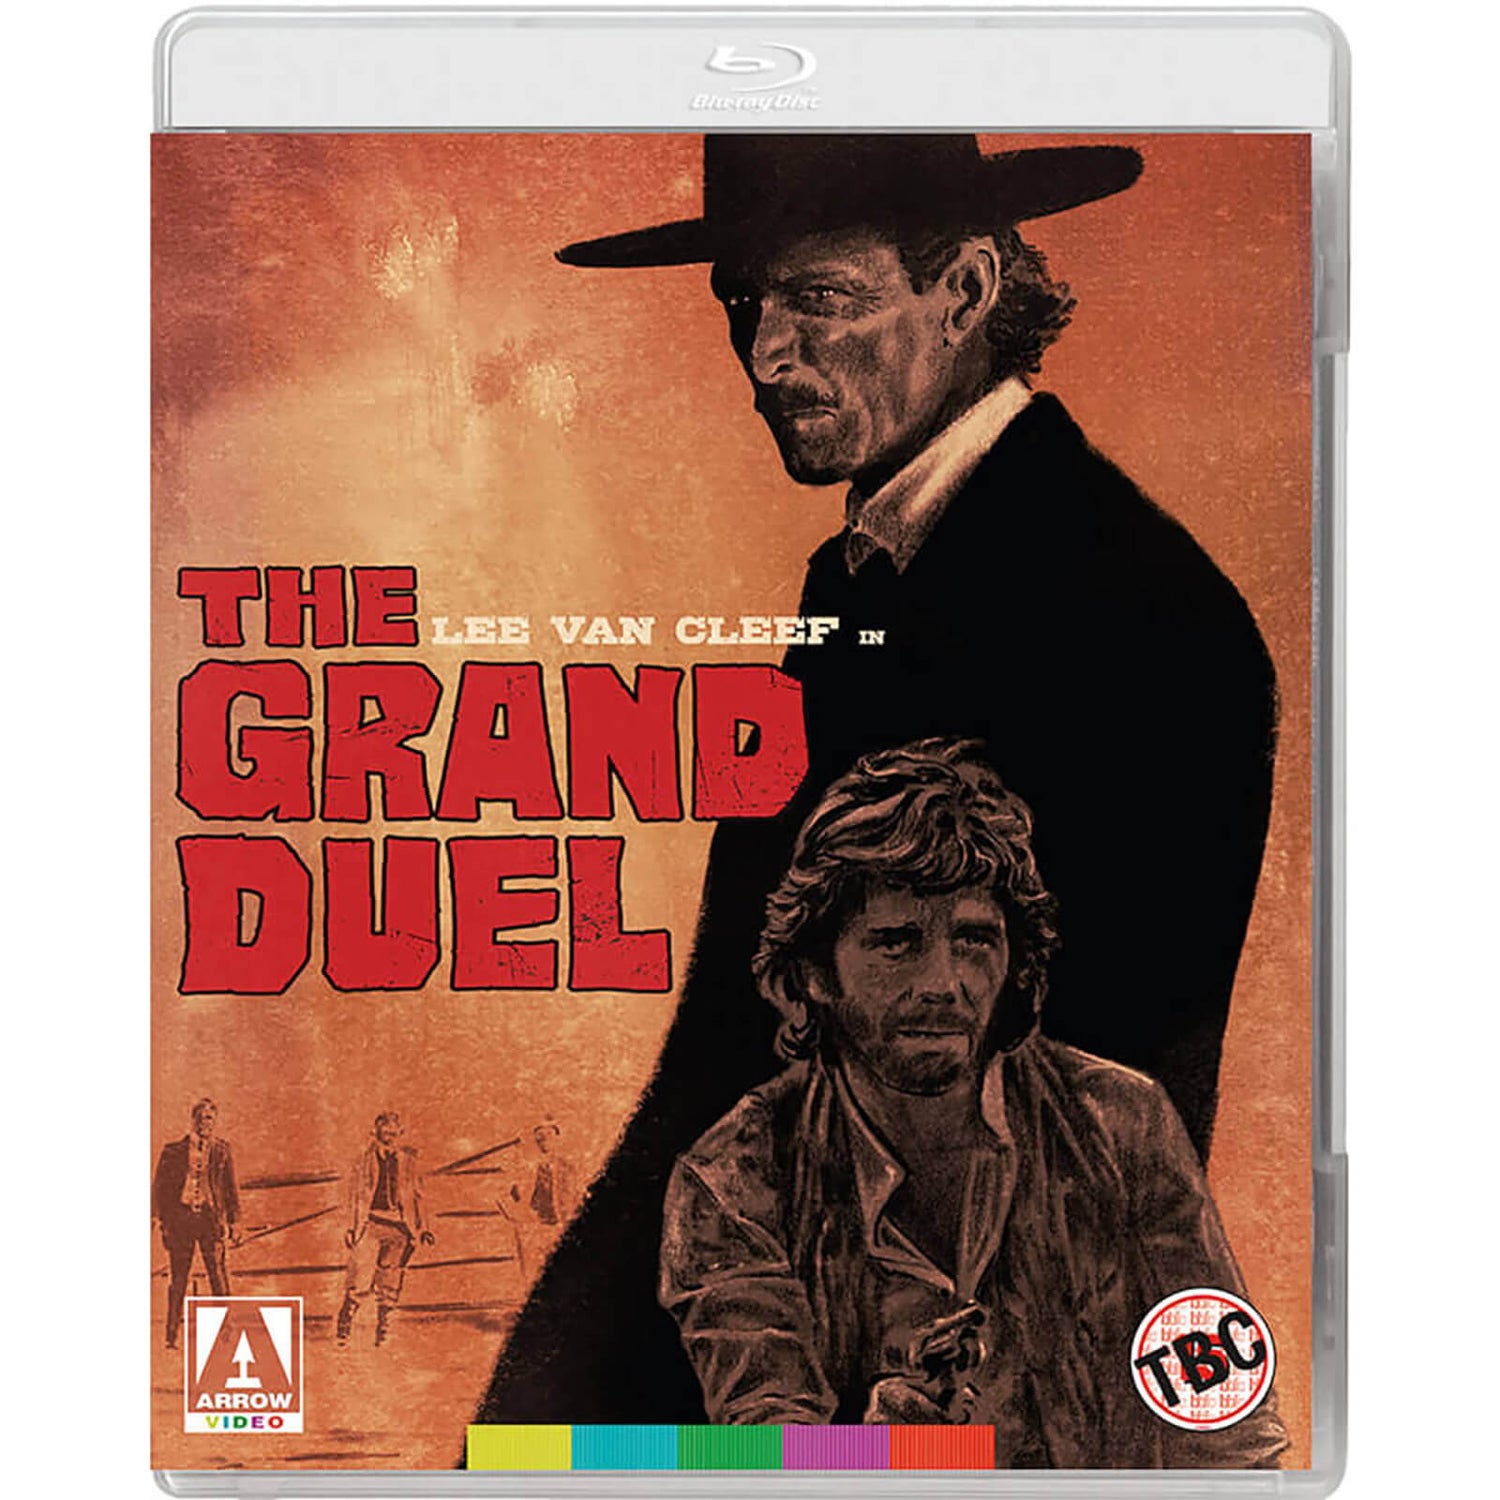 The Grand Duel Blu-ray